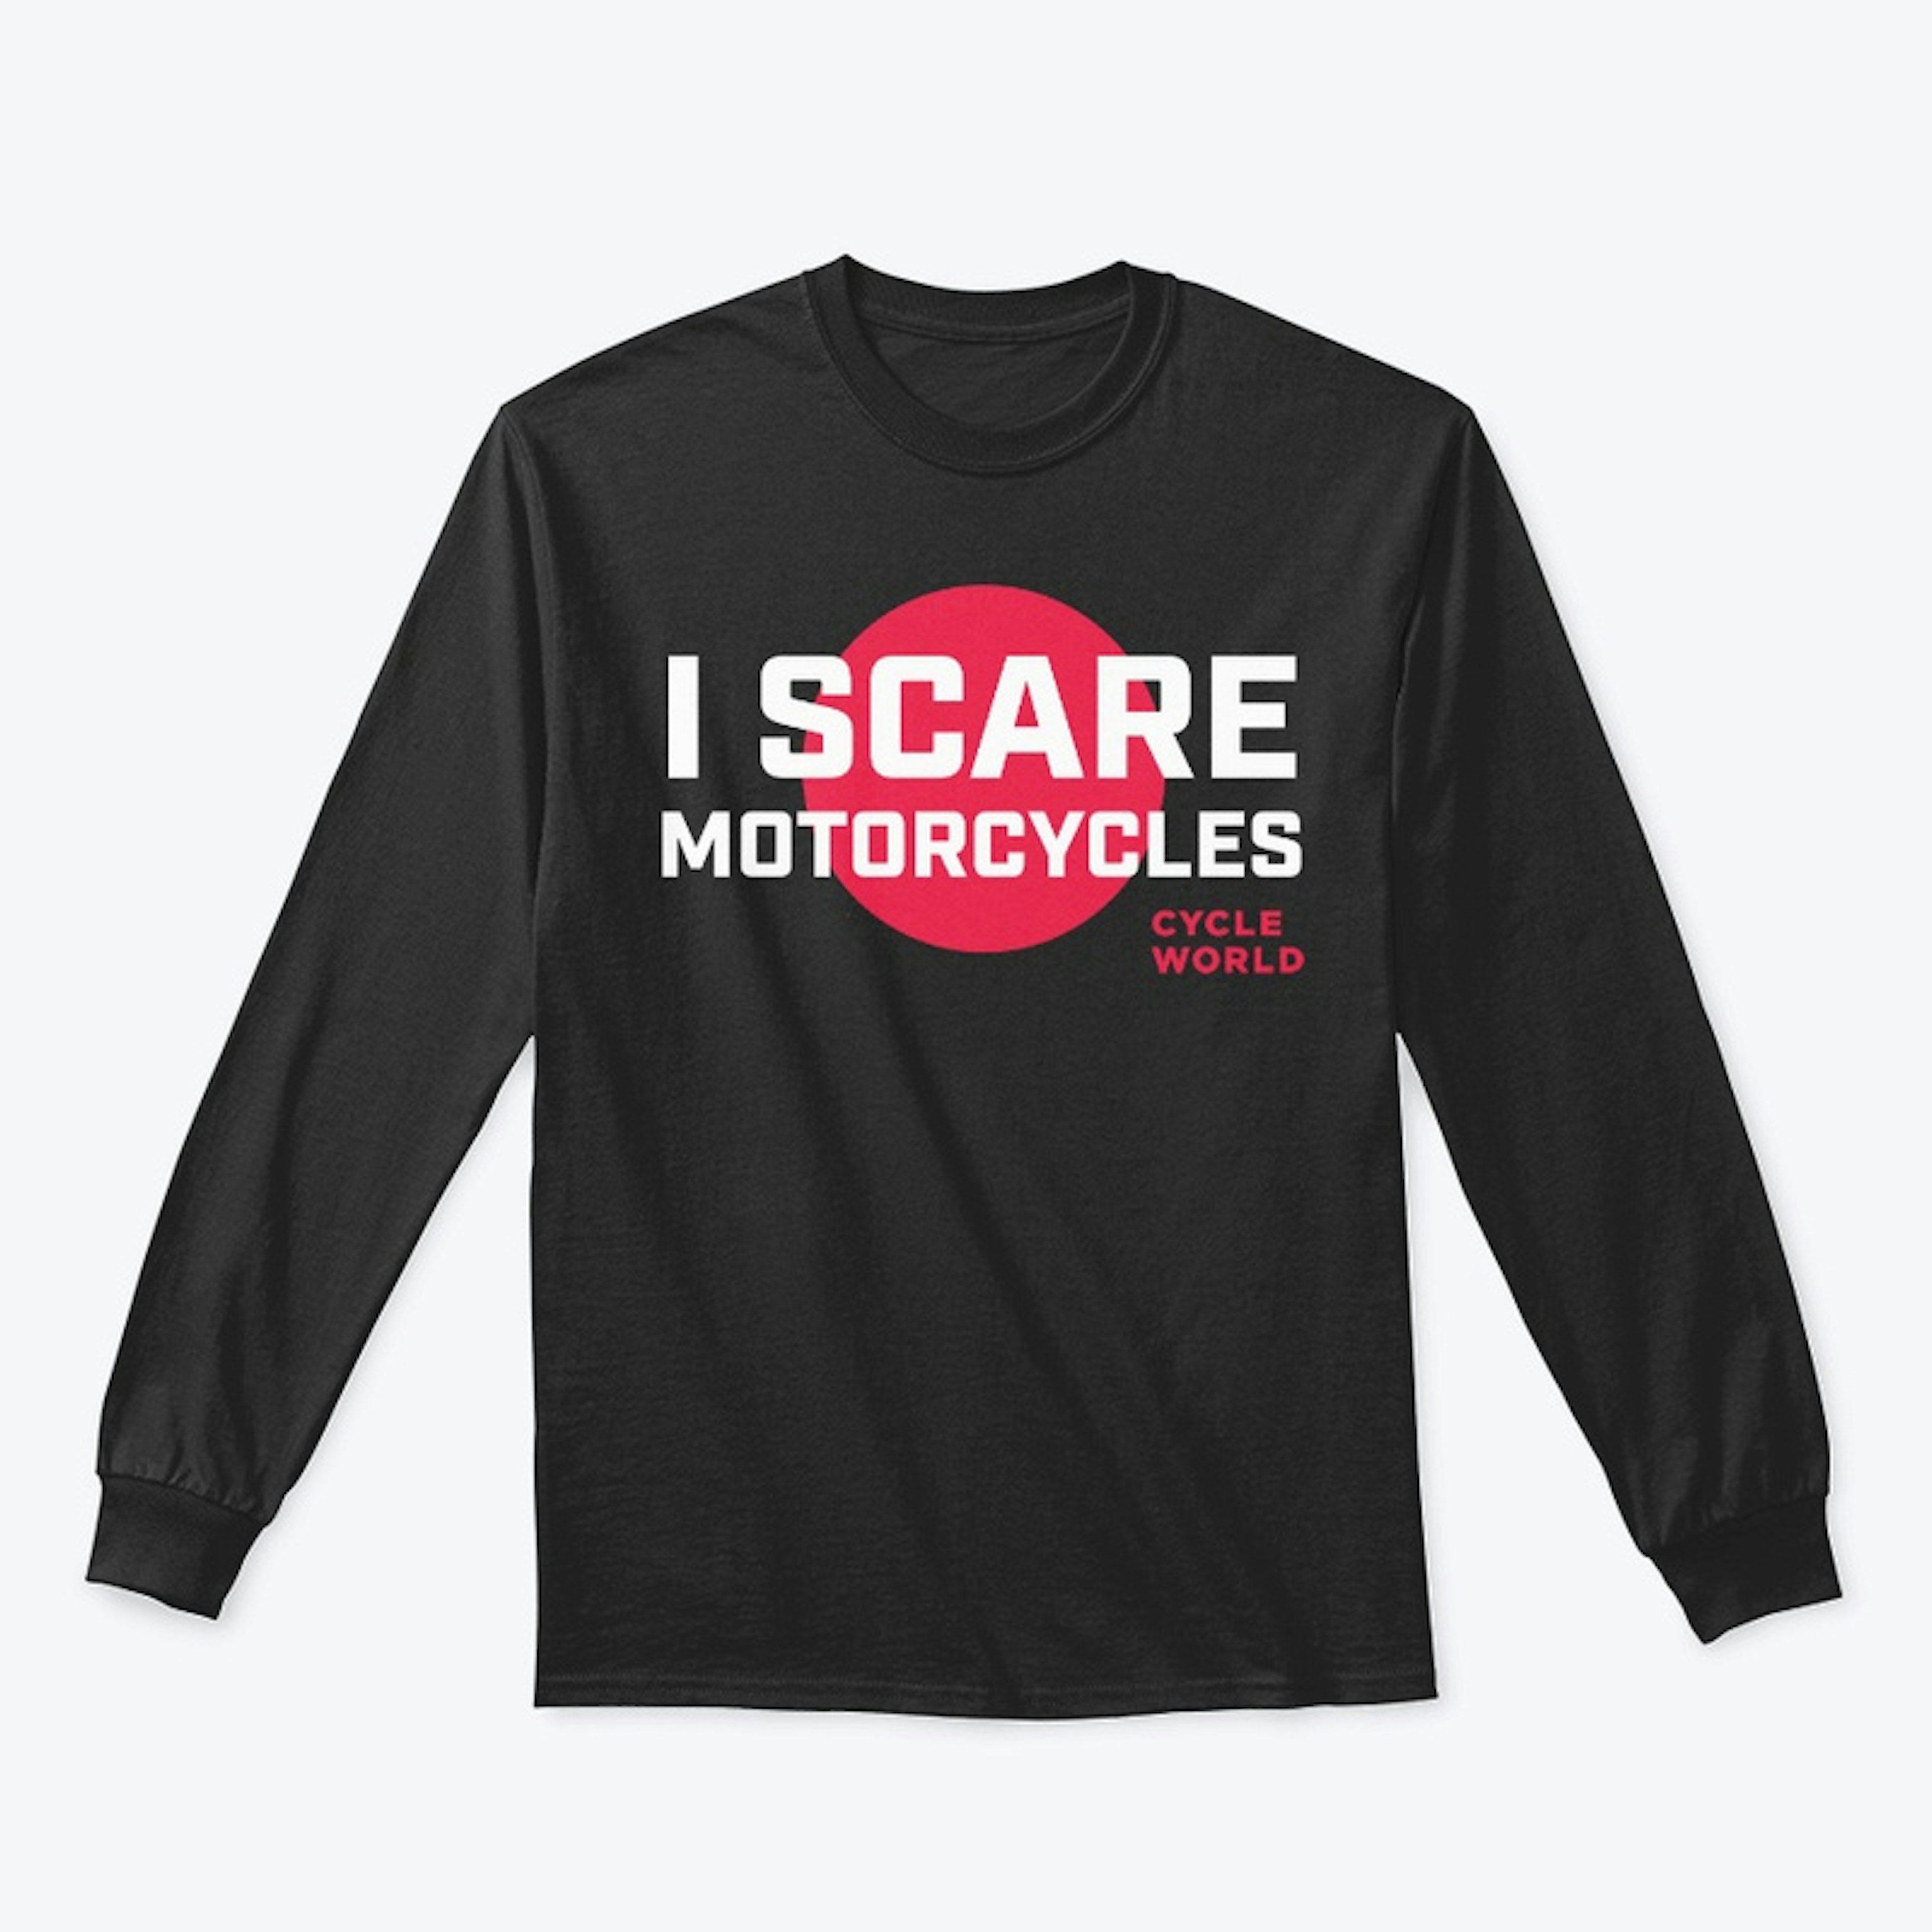 I Scare Motorcycles